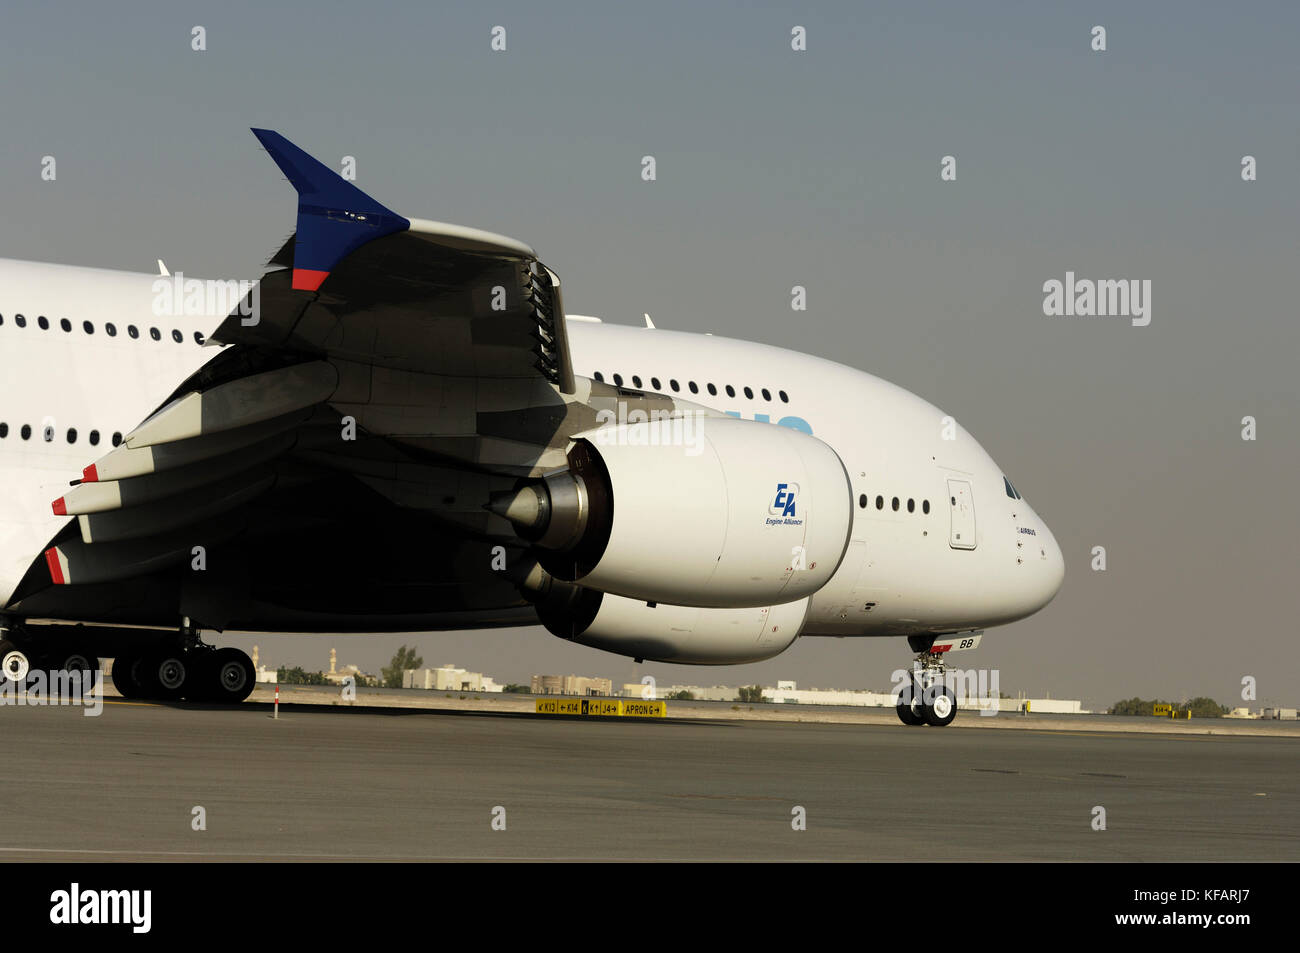 engines and forward fuselage of the Airbus A380-800 at the Dubai AirShow 2007 Stock Photo